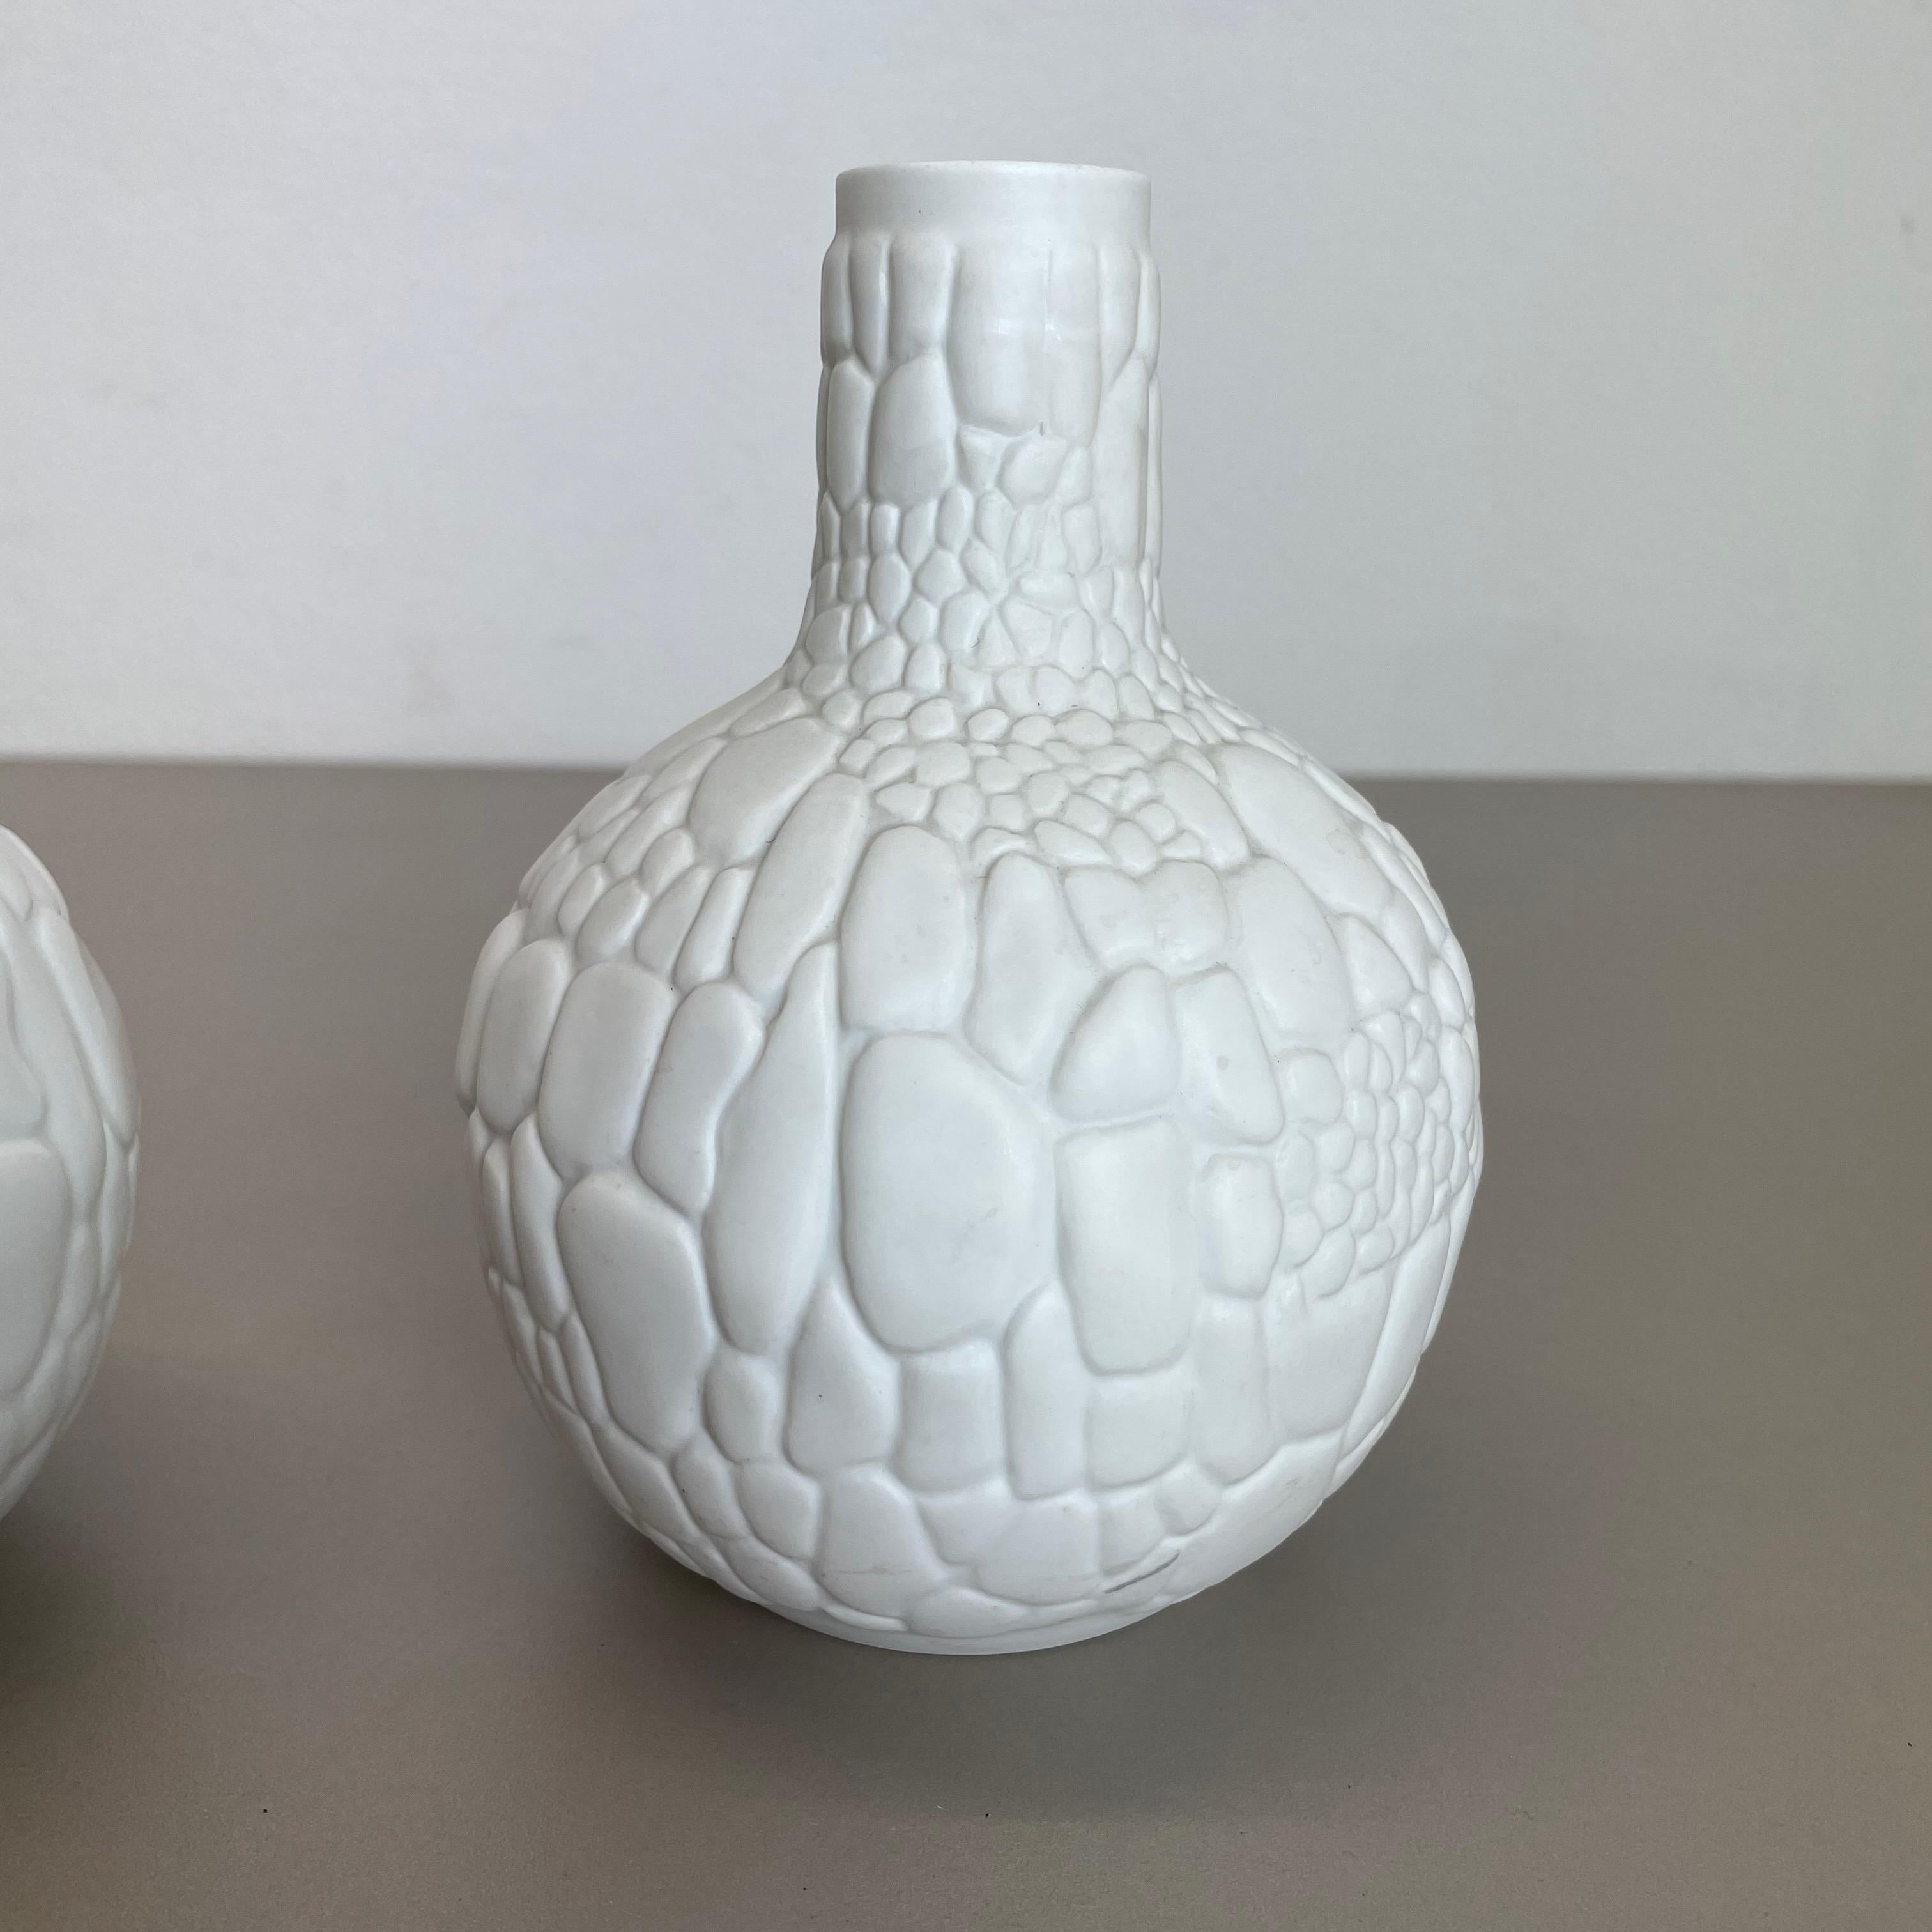 Set of 2 Original OP Art Biscuit Porcelain Vases by AK Kaiser, Germany, 1970s In Good Condition For Sale In Kirchlengern, DE